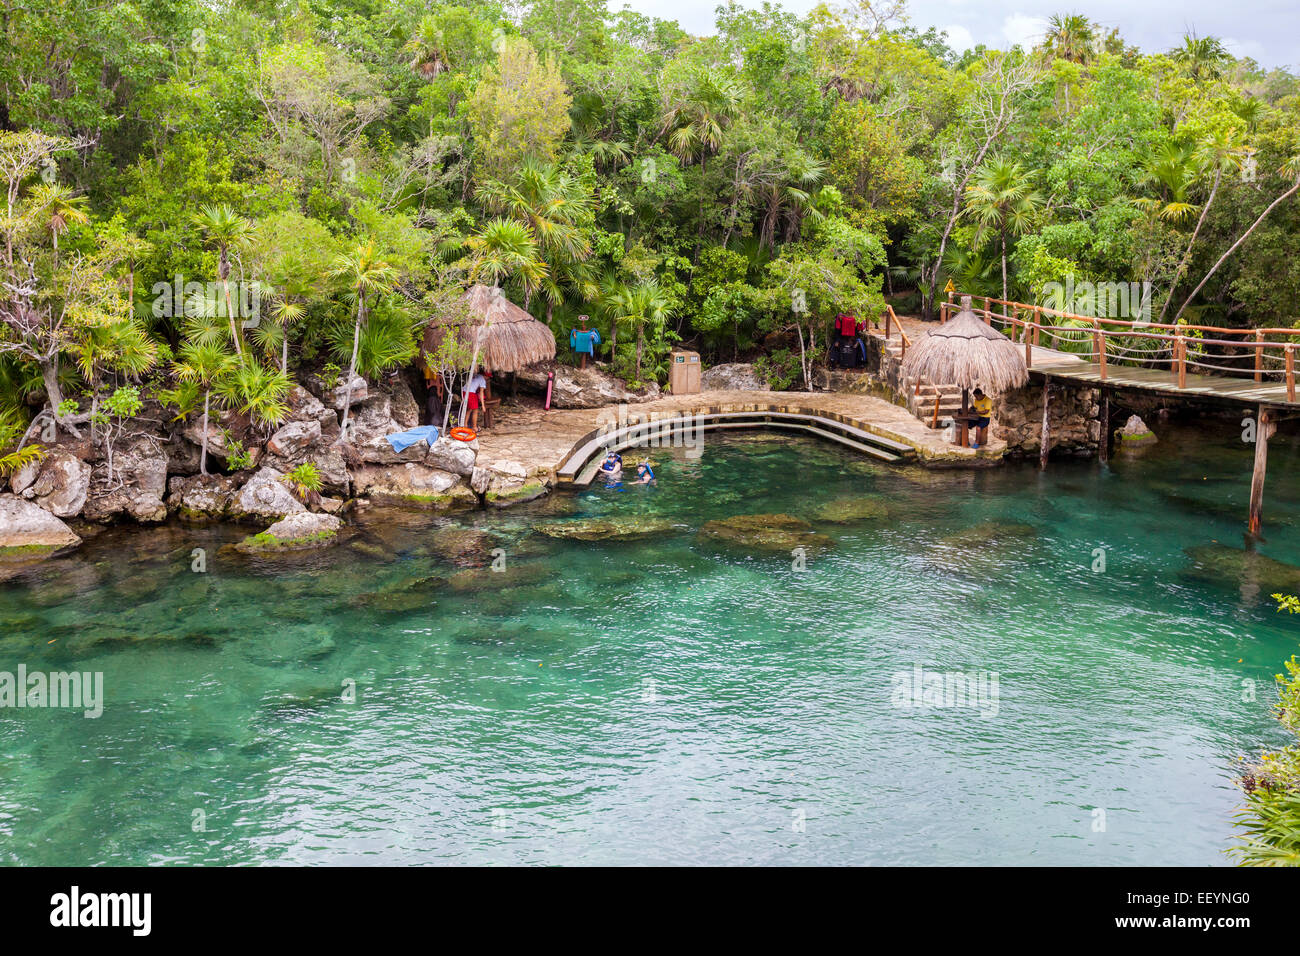 Launching Place for Snorklers and Swimmers, Xel Ha Eco-adventure Park, Playa del Carmen, Riviera Maya, Yucatan, Mexico. Stock Photo